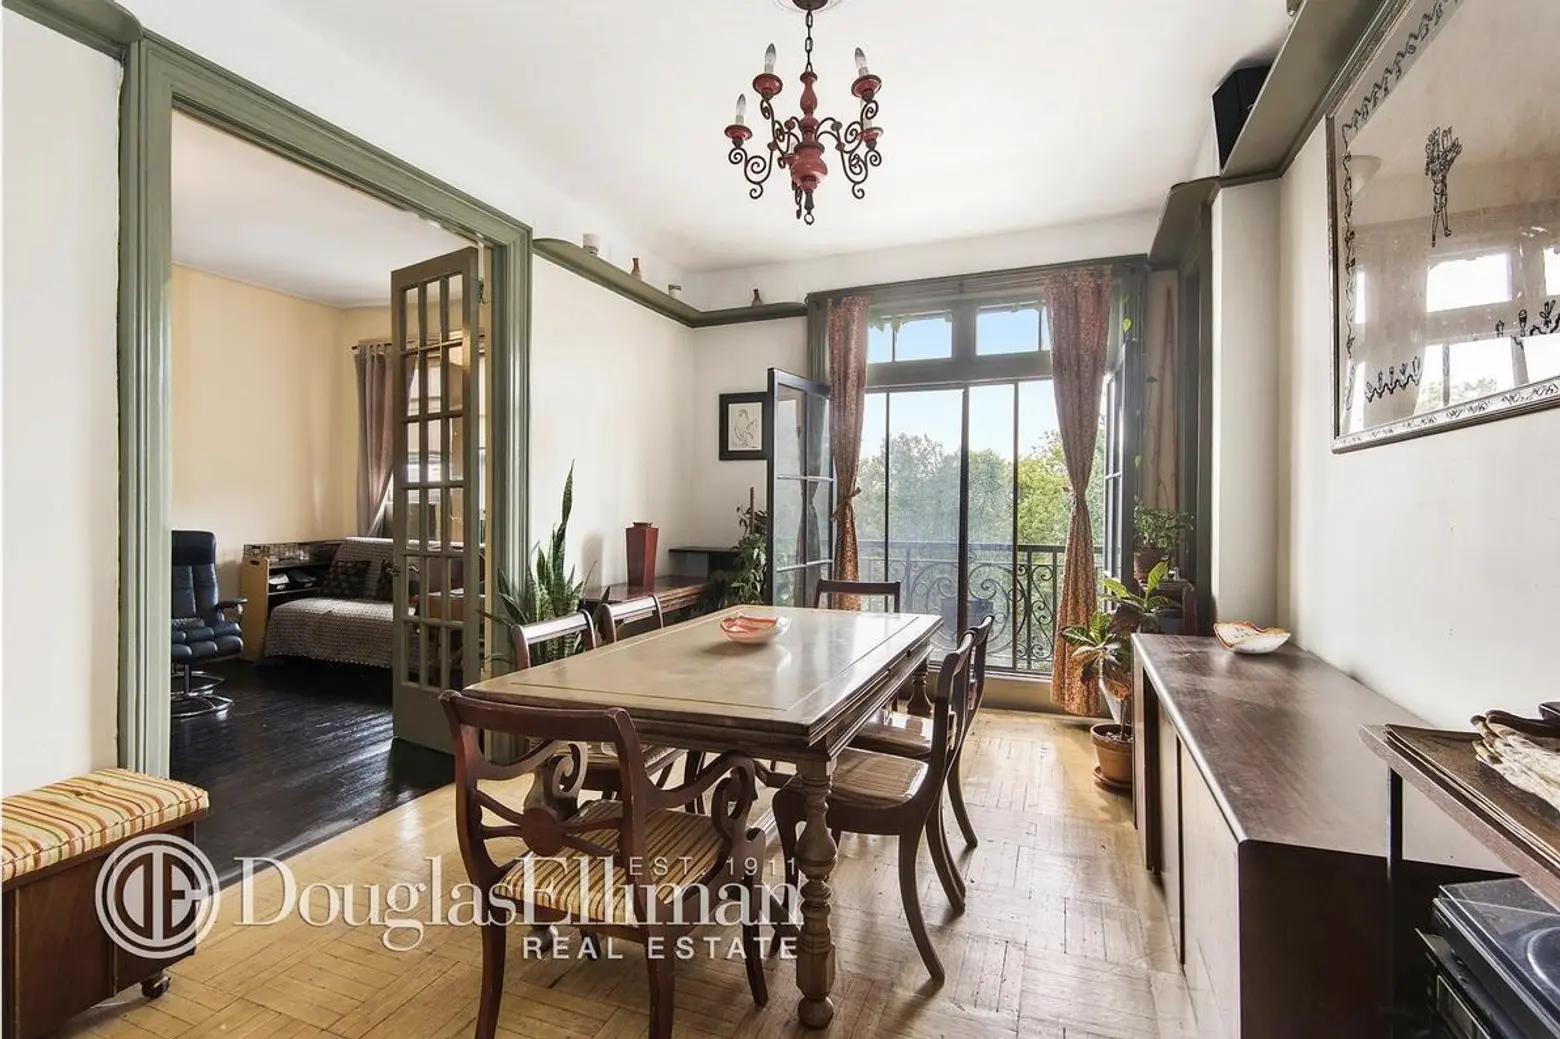 Soak in Views of Morningside Park from this $1M Classic Six Co-op